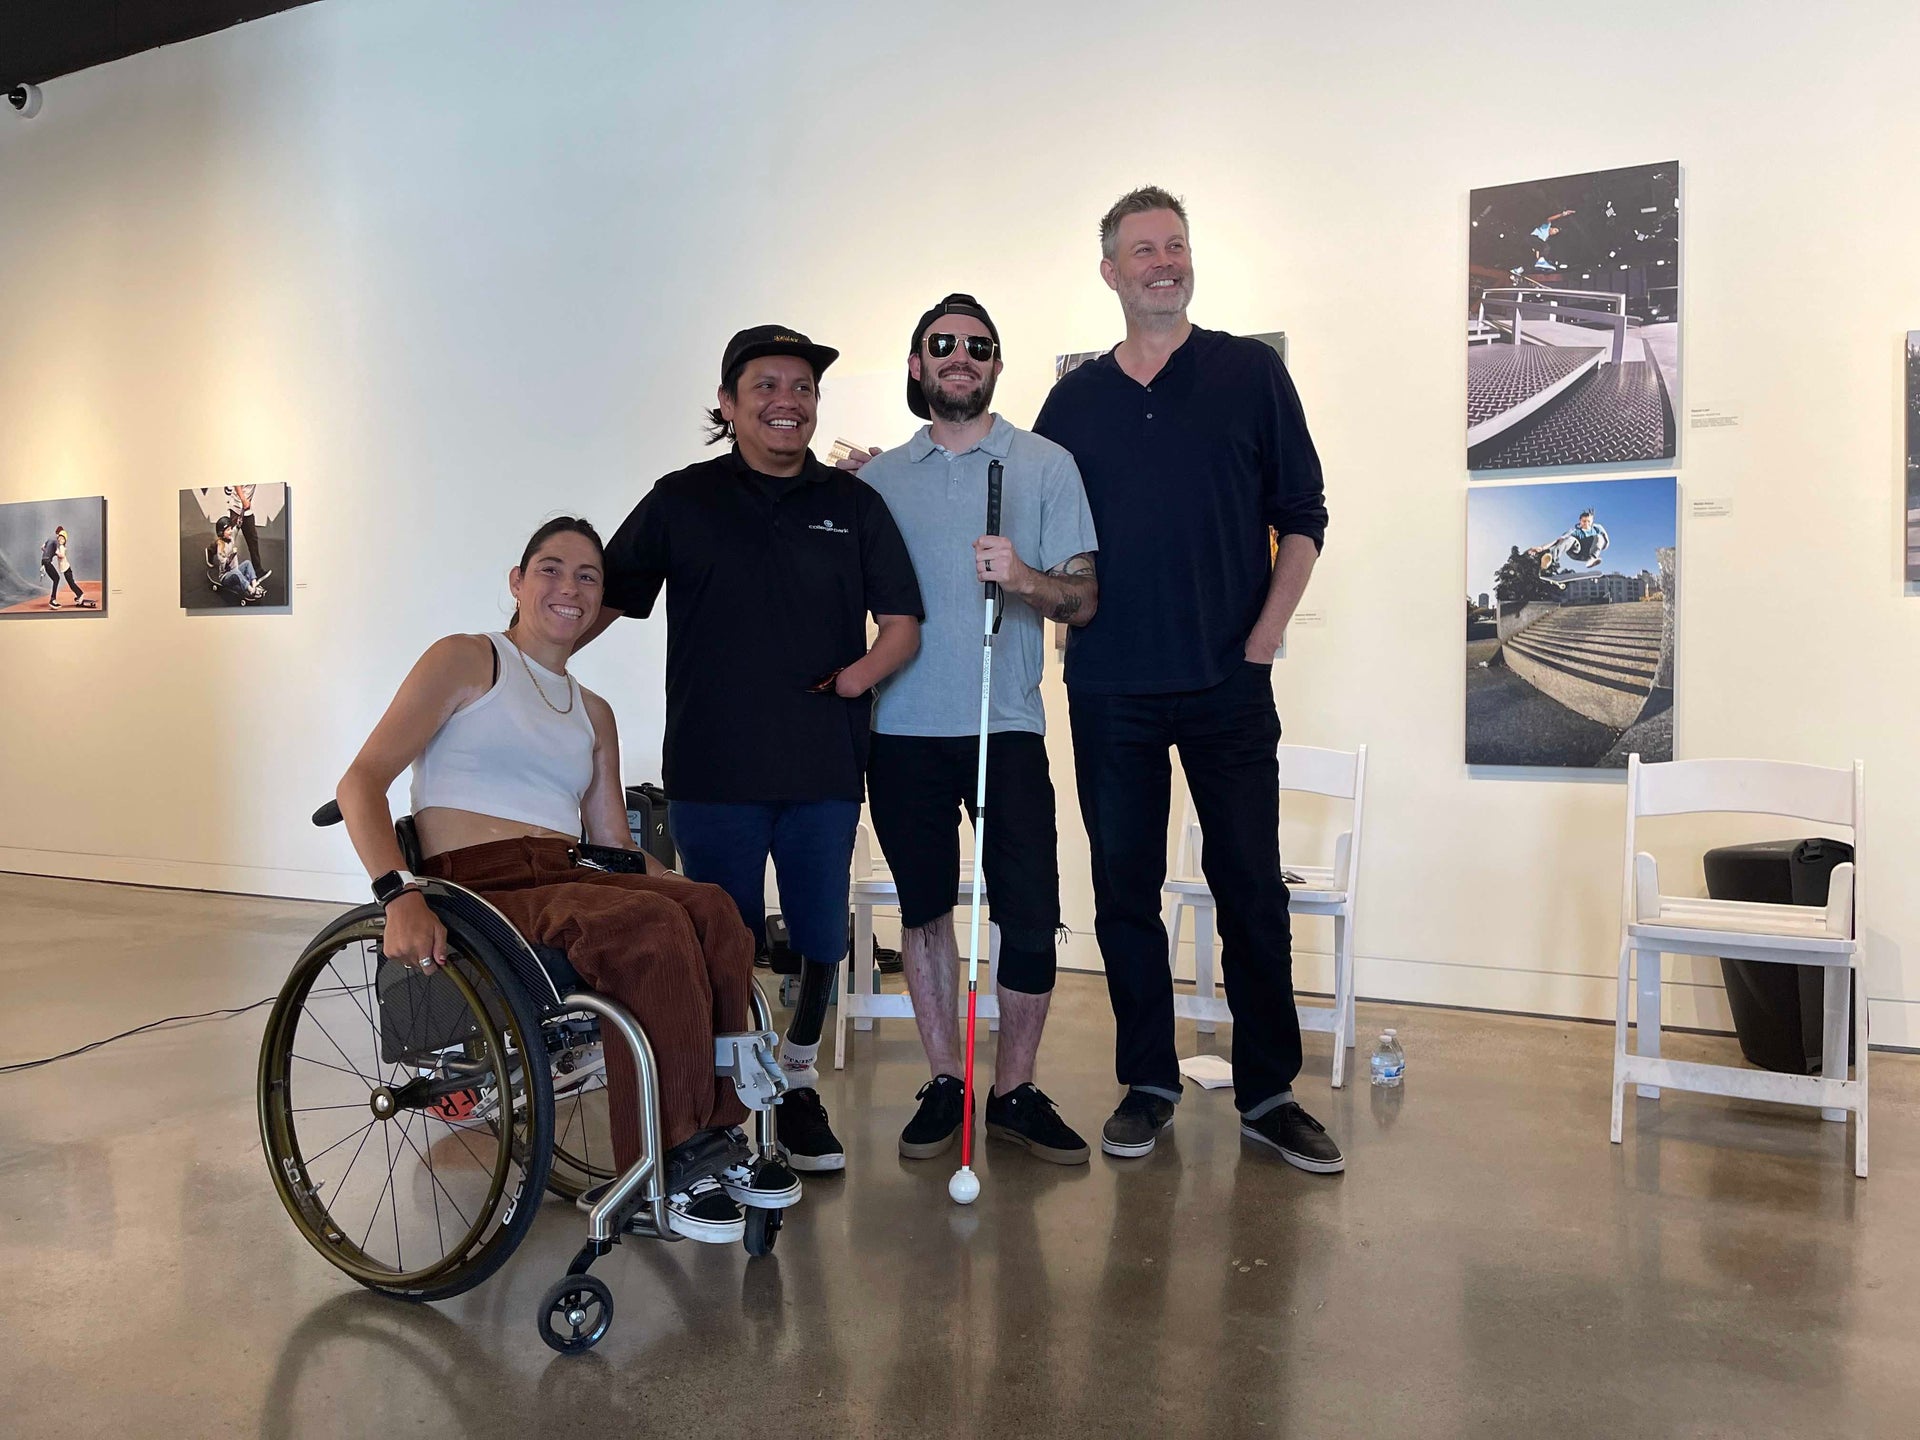 Load video: Robert Brink Adaptive Skateboarding and WCMX Panel at The New Normal Exhibition